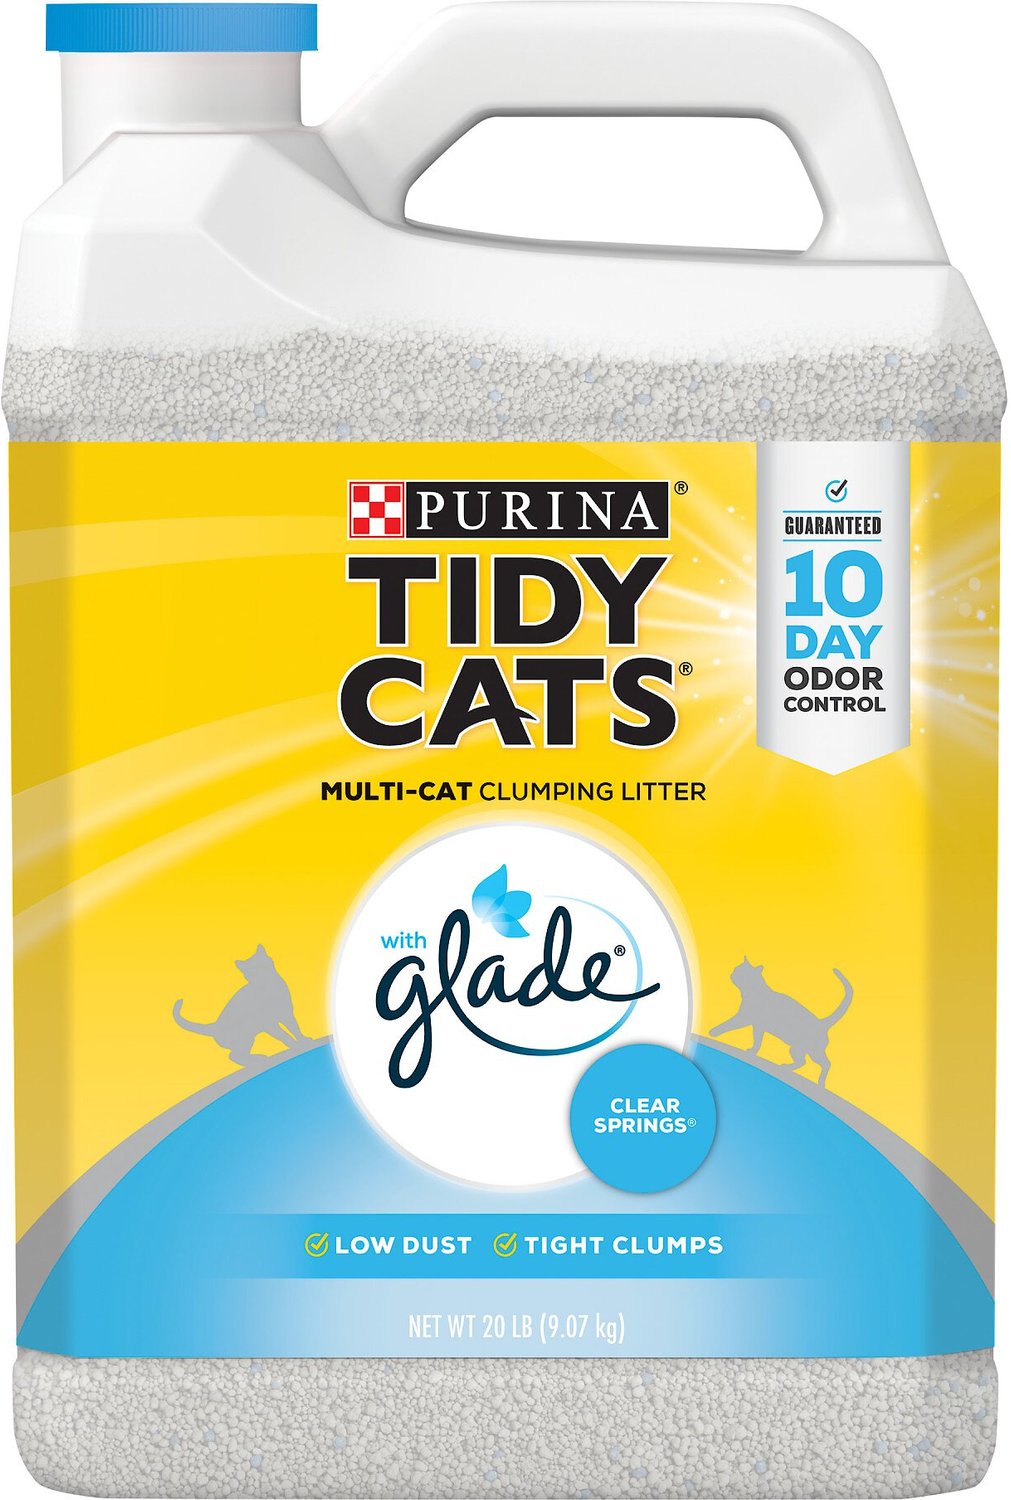 The 5 Best Cat Litters For Odor Control Our 1 Pick For 2020‎